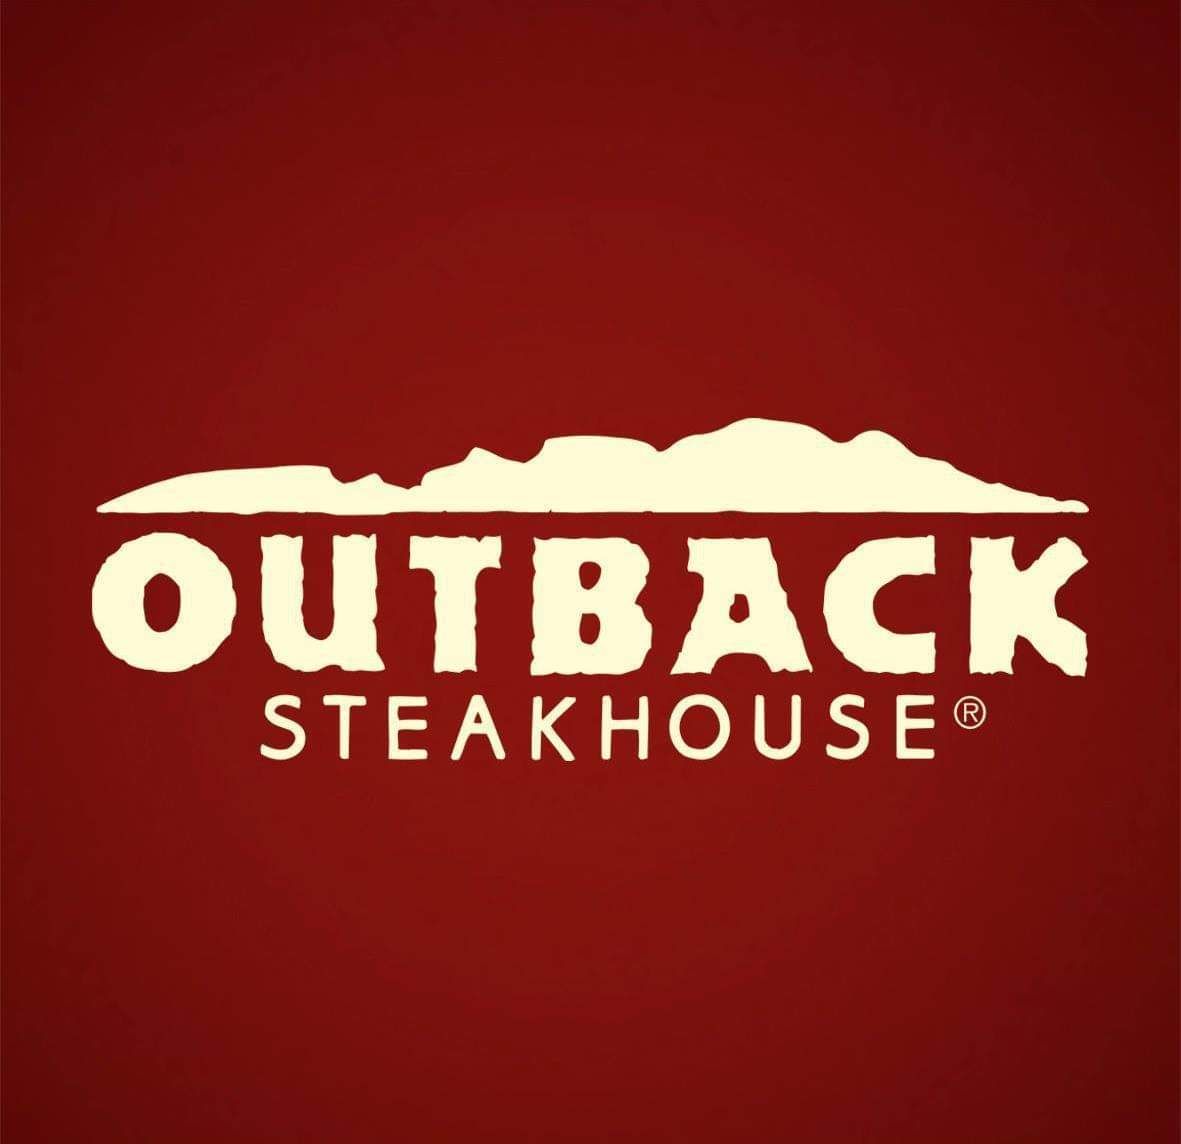 Site Service Audit Report - Outback Steakhouse